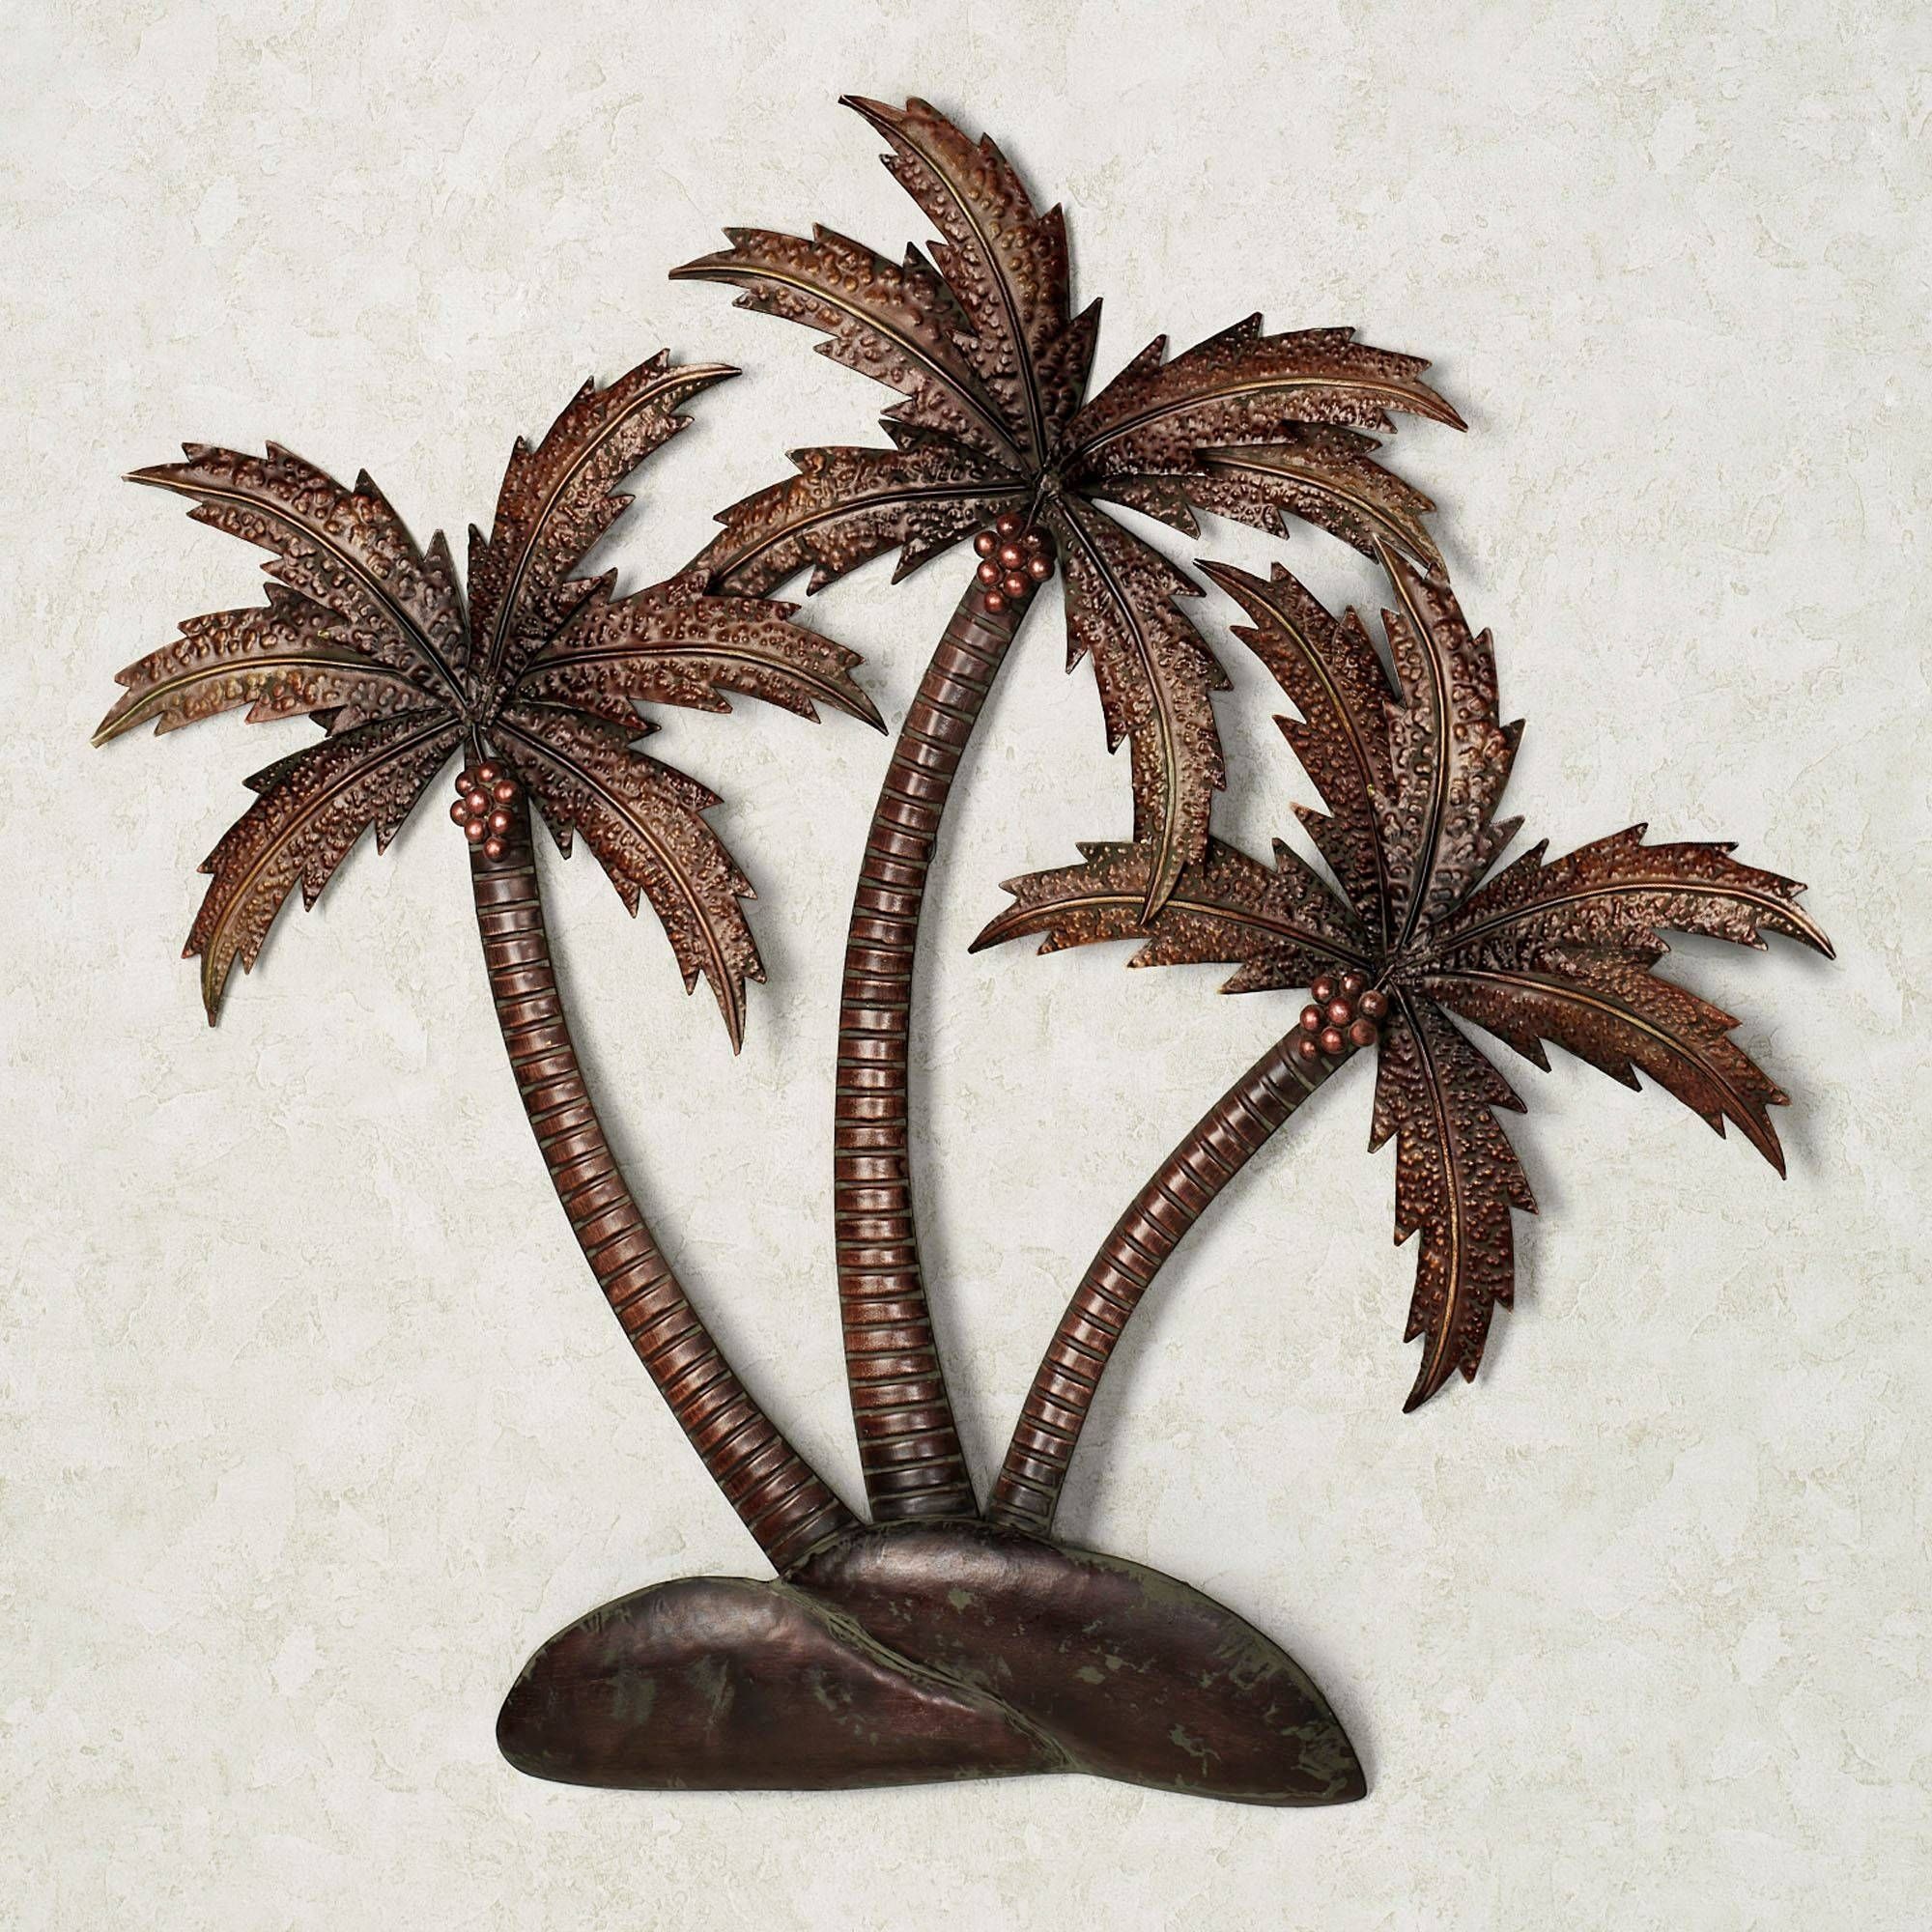 Wall Art Design Ideas: Sculpture Metal Palm Tree Wall Art Outdoor Intended For Recent Stainless Steel Outdoor Wall Art (View 12 of 20)